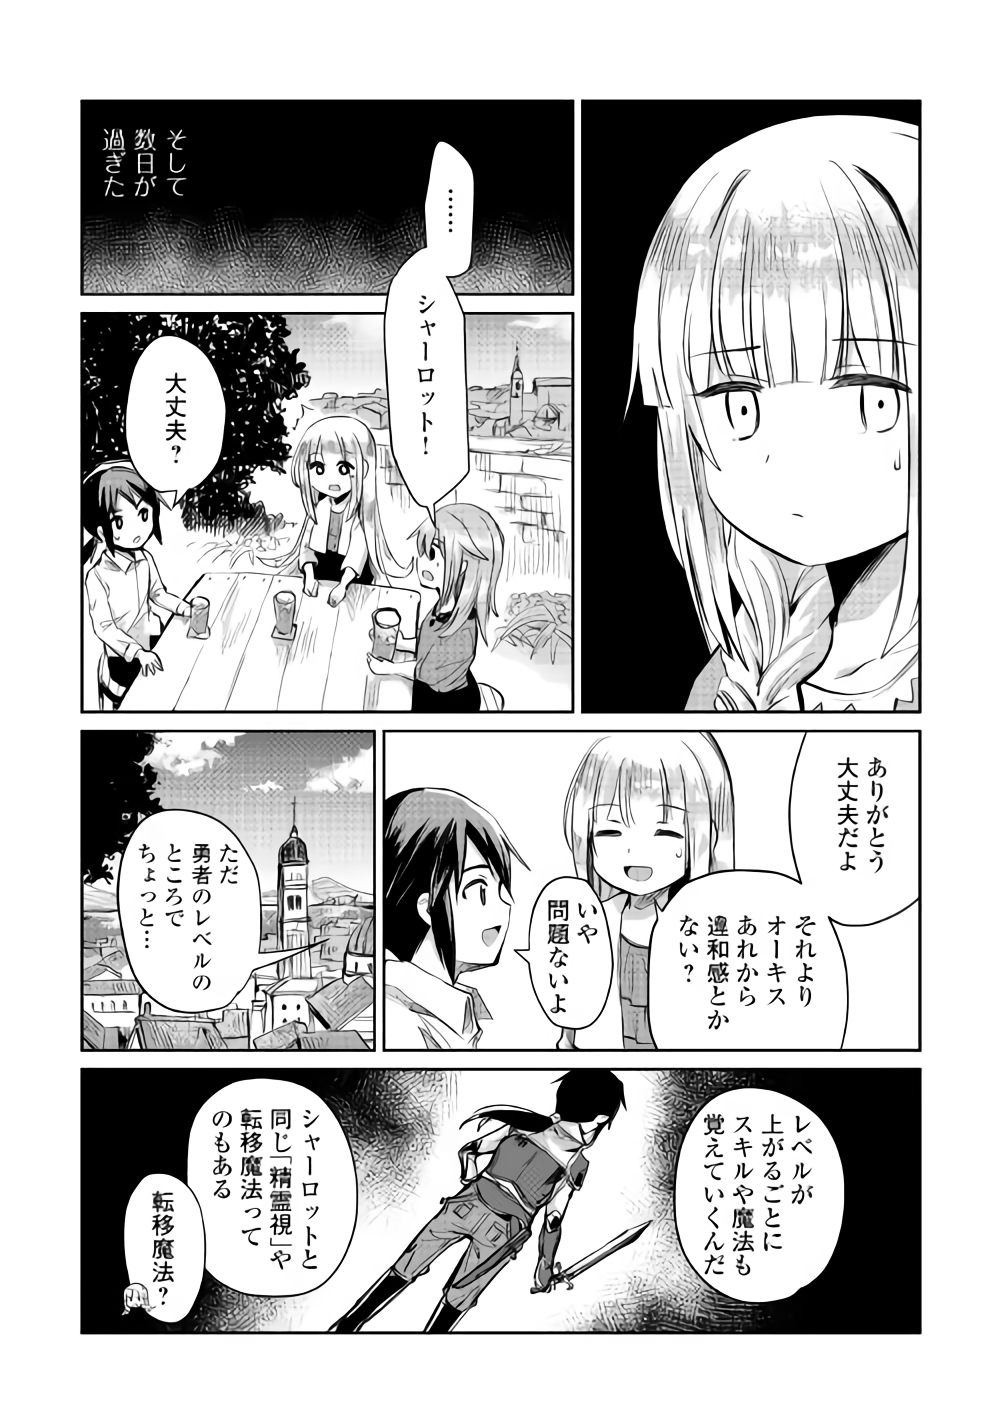 The Former Structural Researcher’s Story of Otherworldly Adventure 第7話 - Page 9